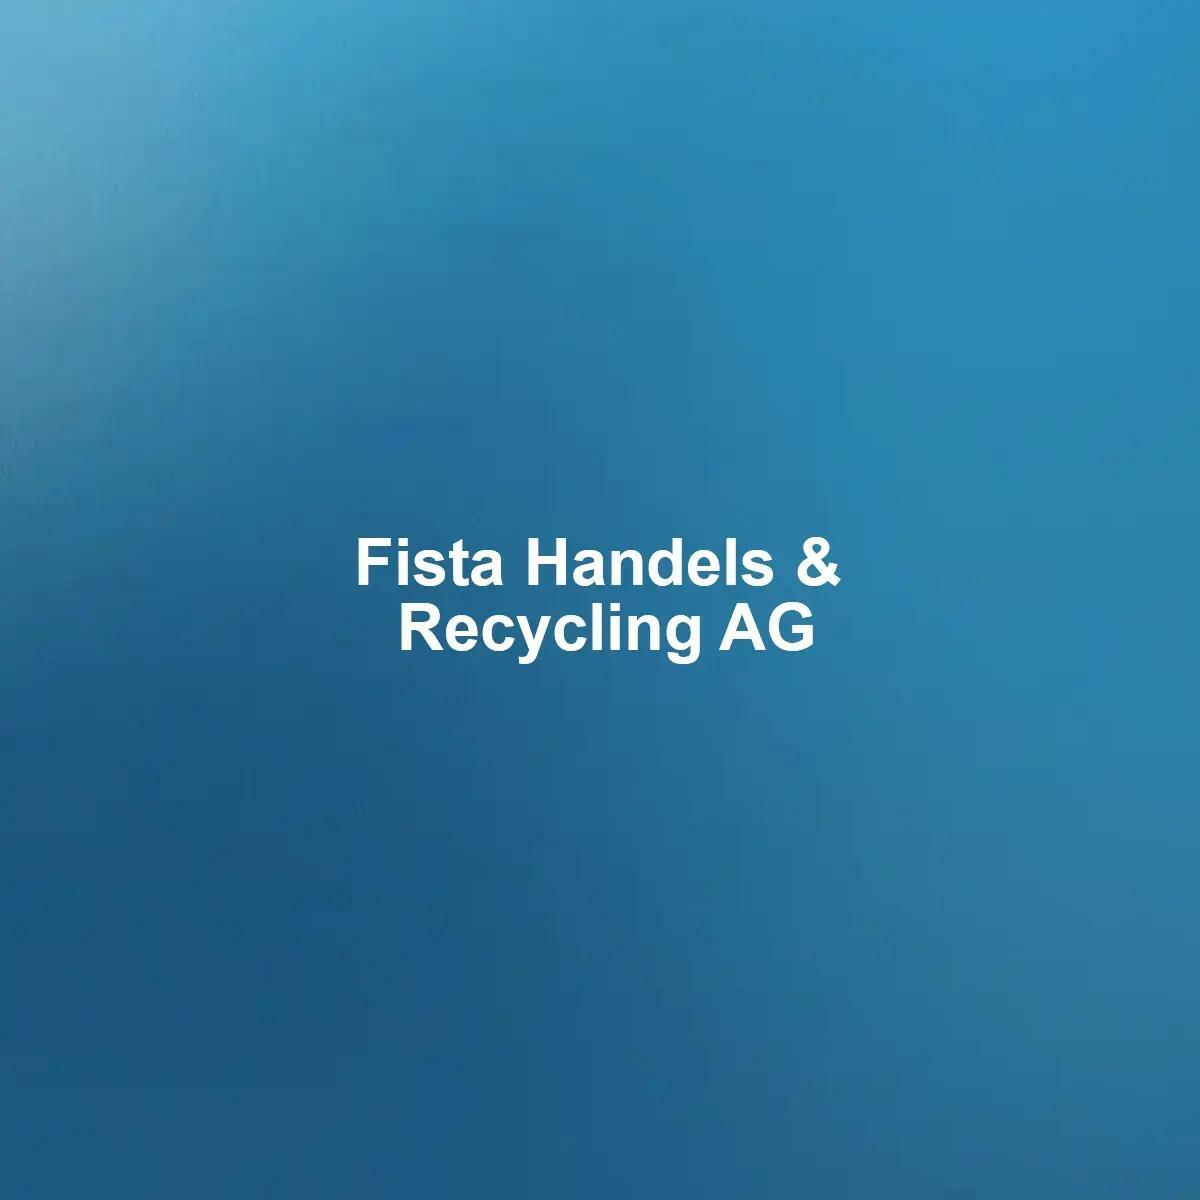 Fista Handels & Recycling AG - A leading global supplier